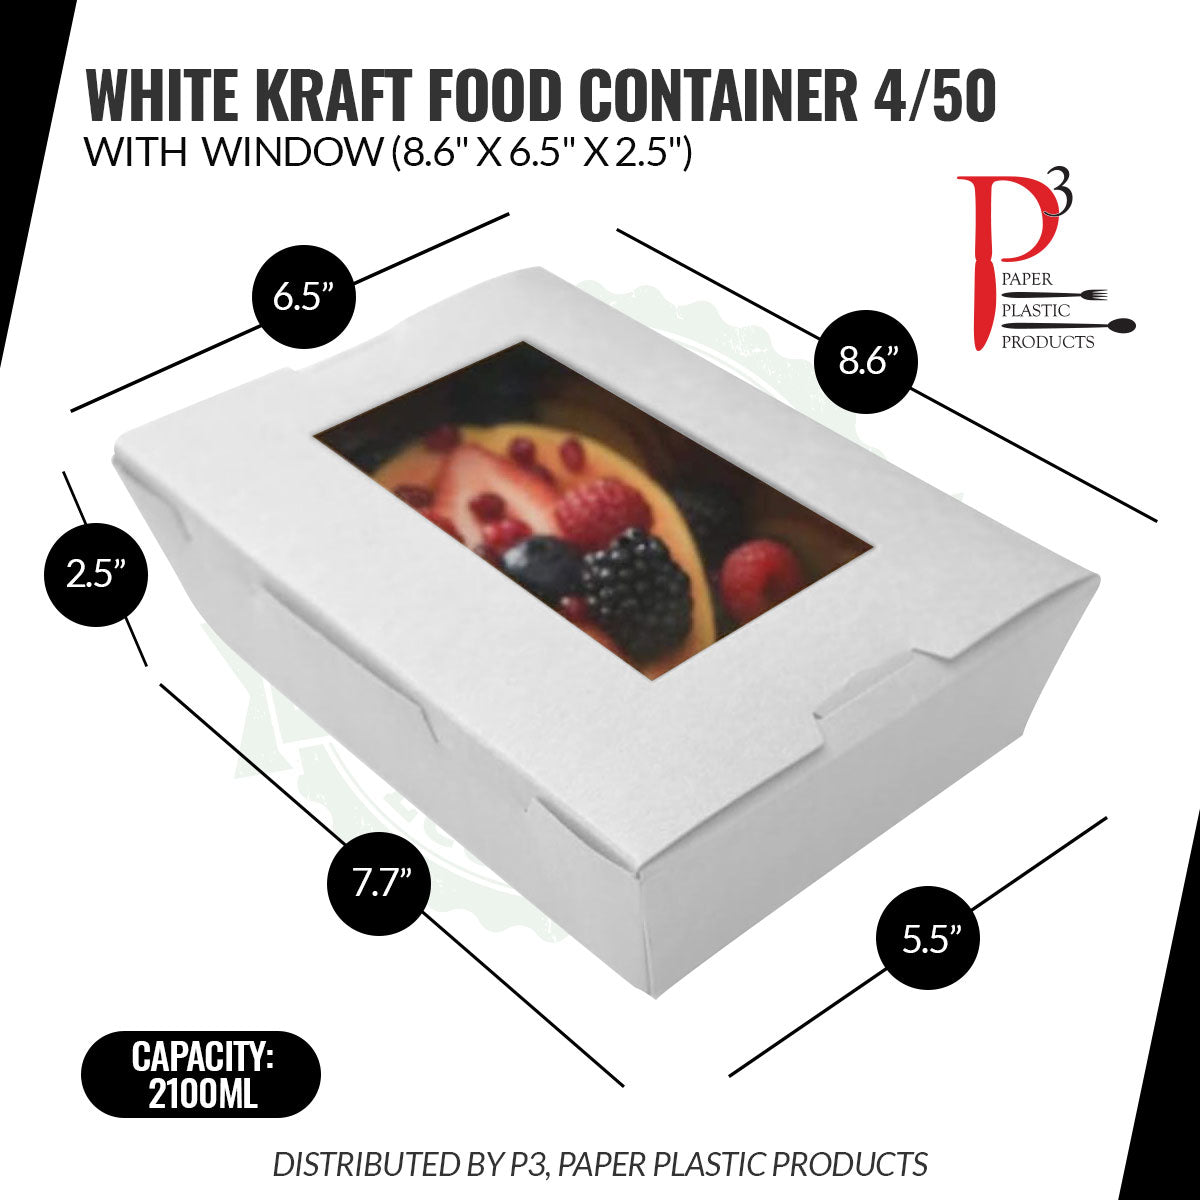 Kraft Food Container White with window 8.6